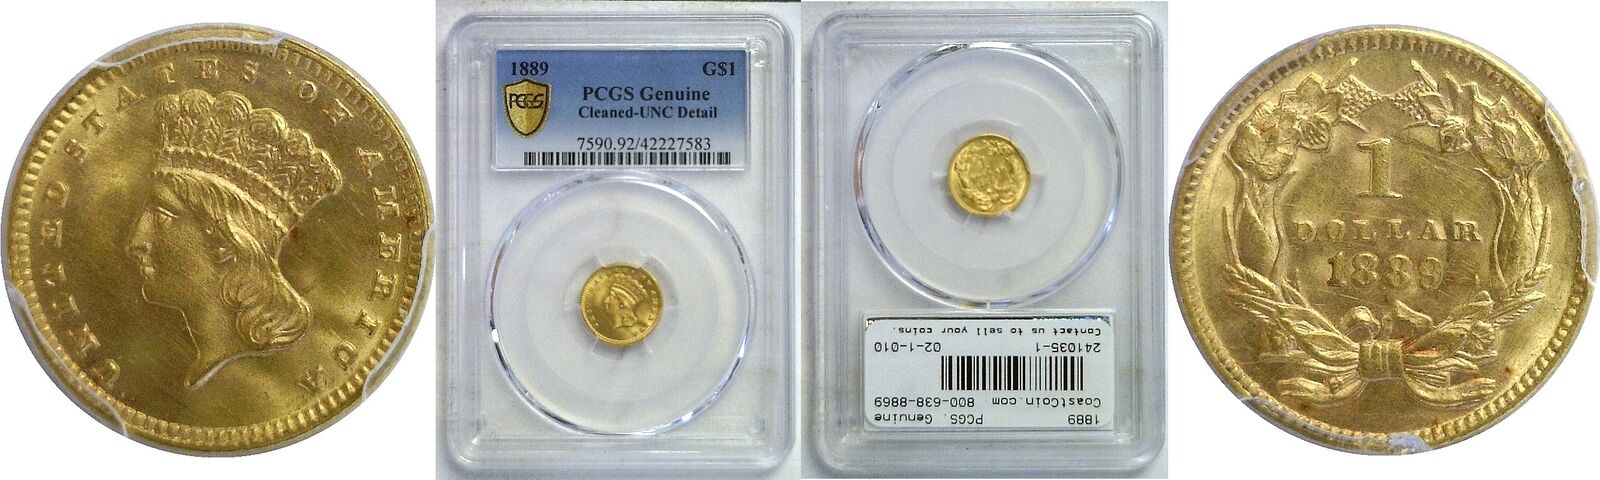 1889 $1 Gold Coin Pcgs Genuine